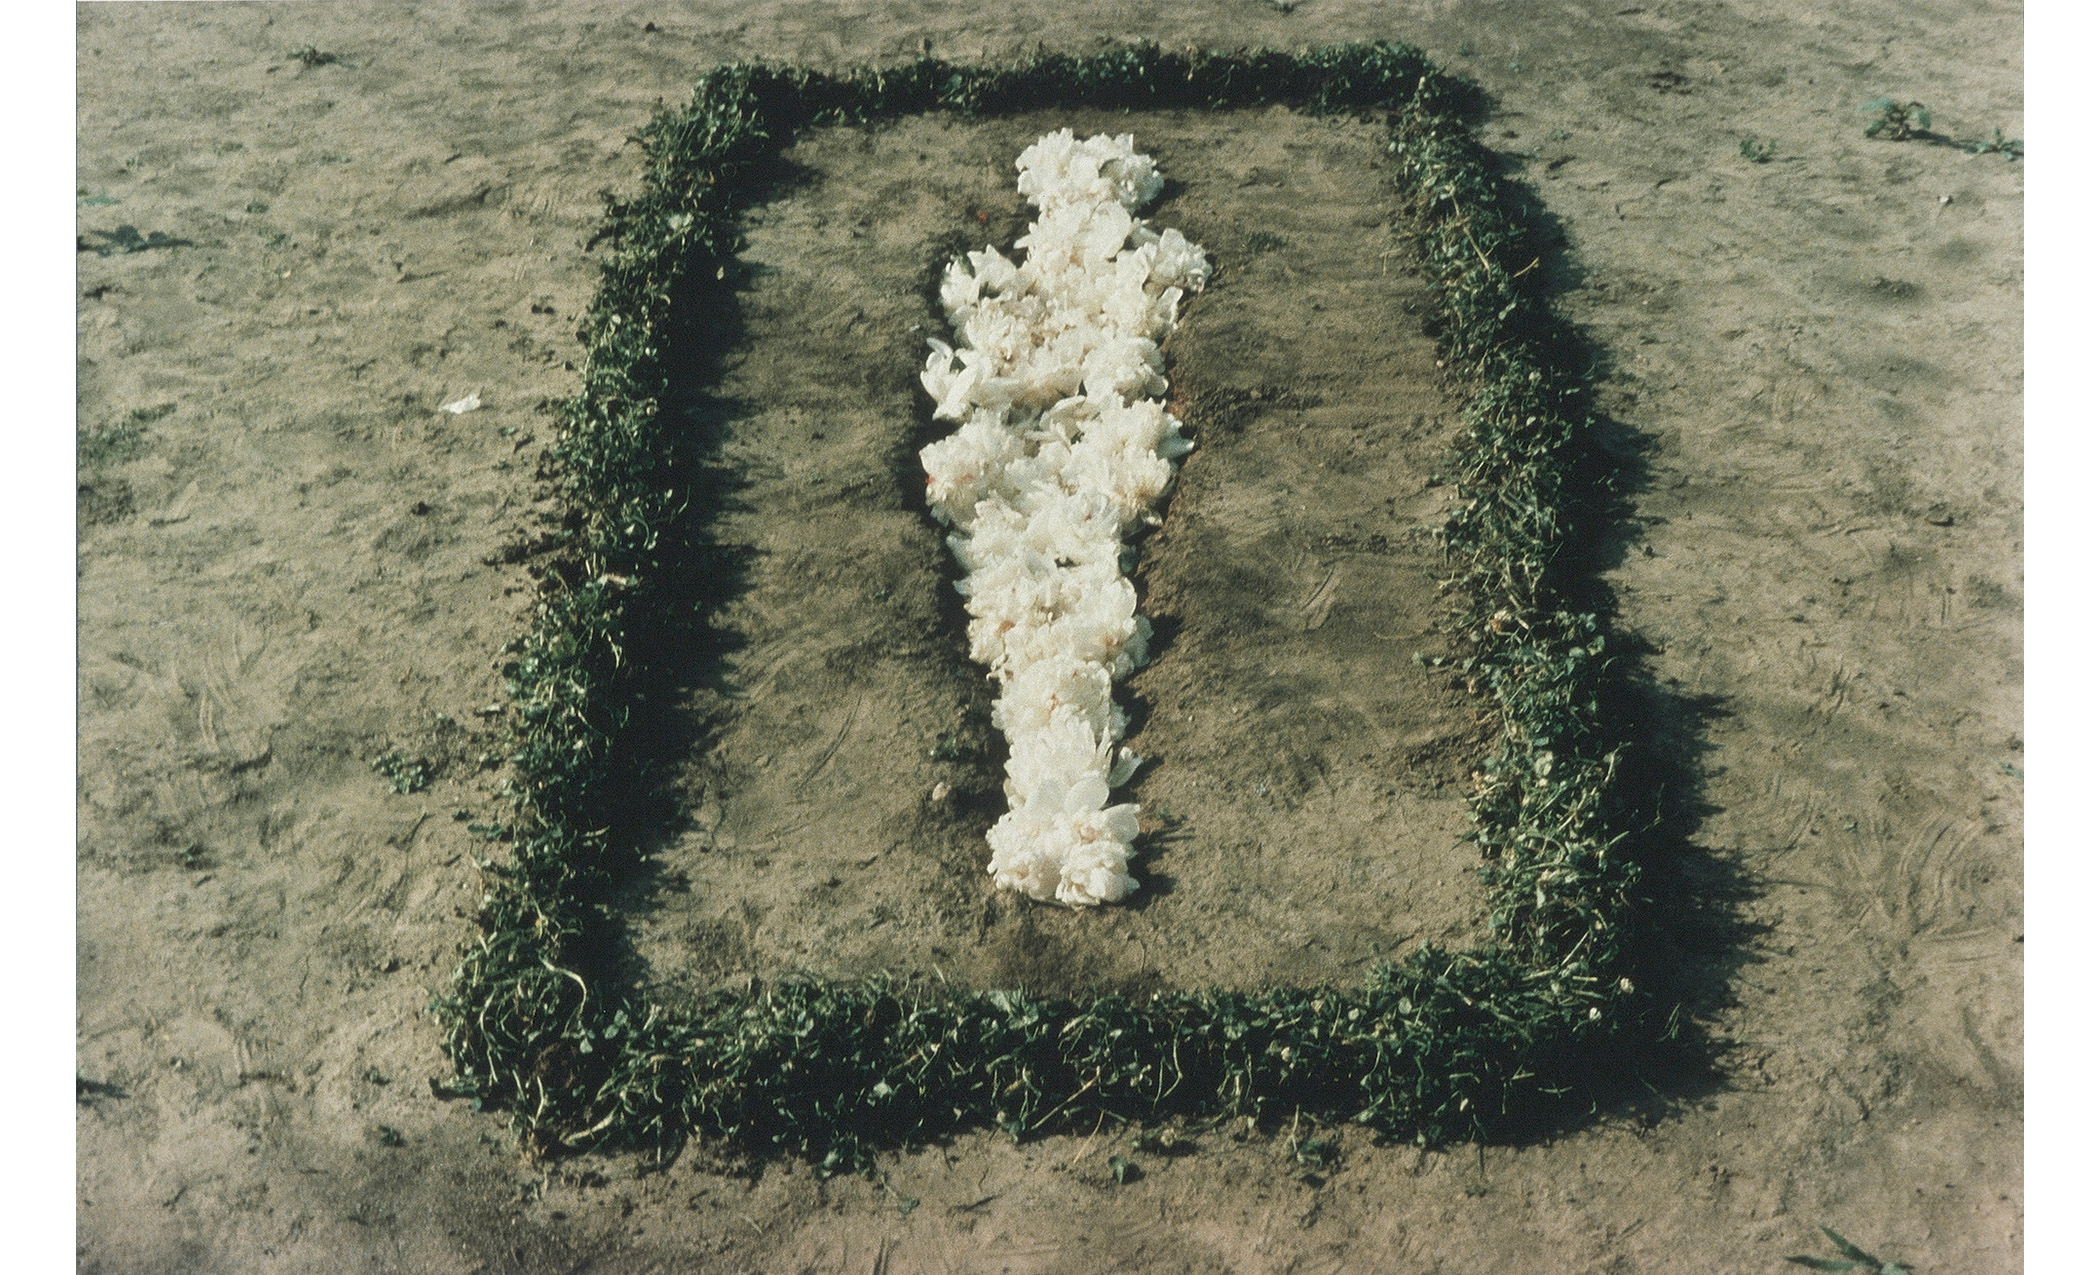 dirt ground, greenery placed into a rectangular shape around white flowers filling a figure shaped indentation in the ground